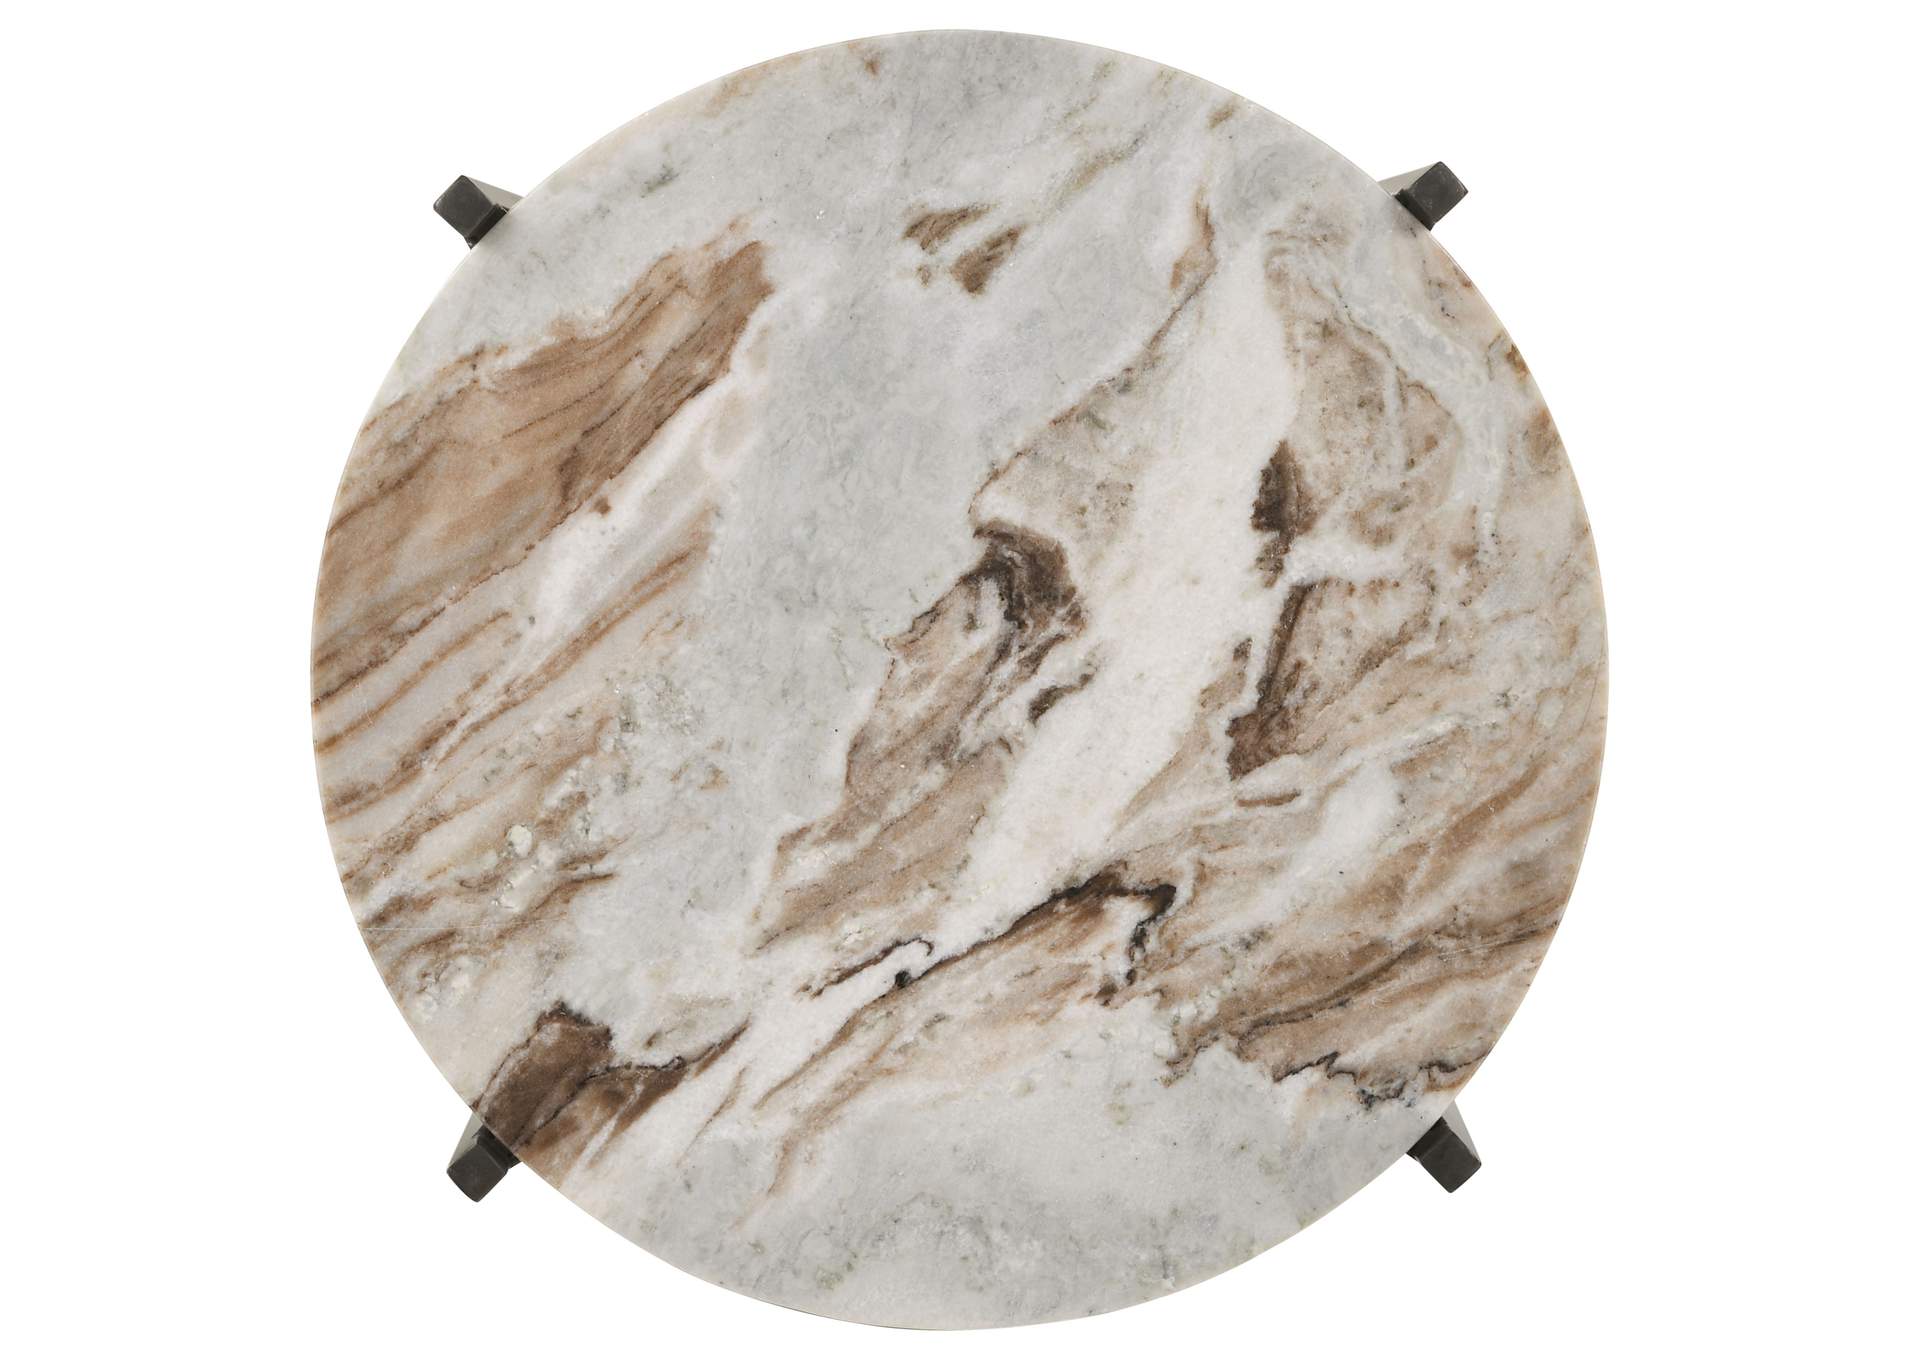 Noemie Round Accent Table with Marble Top White and Gunmetal,Coaster Furniture